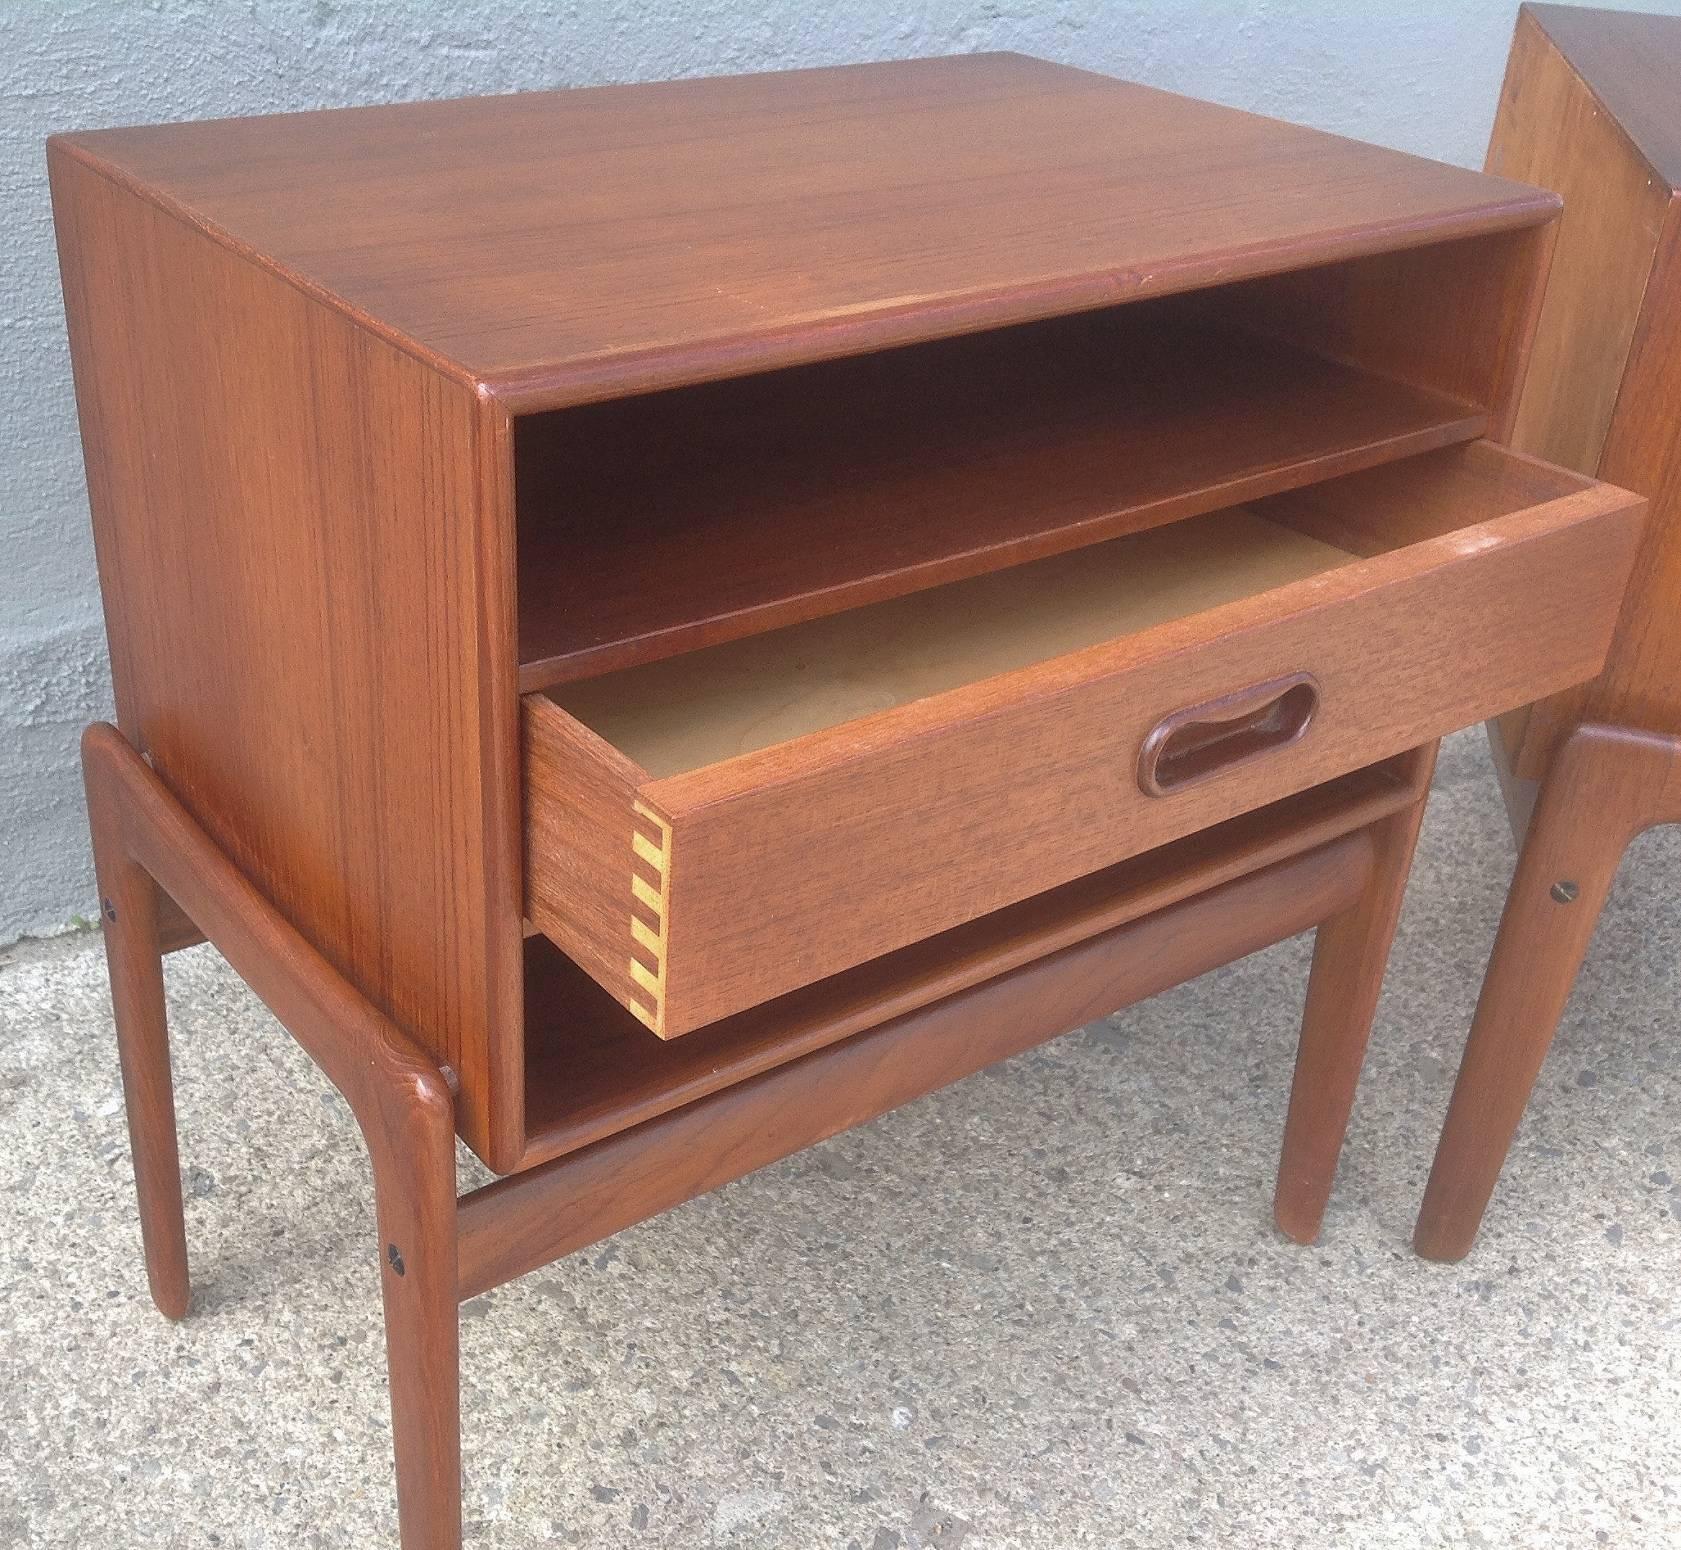 Nice pair of Danish teak side tables or nightstands by Arne Wahl Iverson for Vamo Sonderborg. Small case with single drawer between open shelves raised on shaped legs.